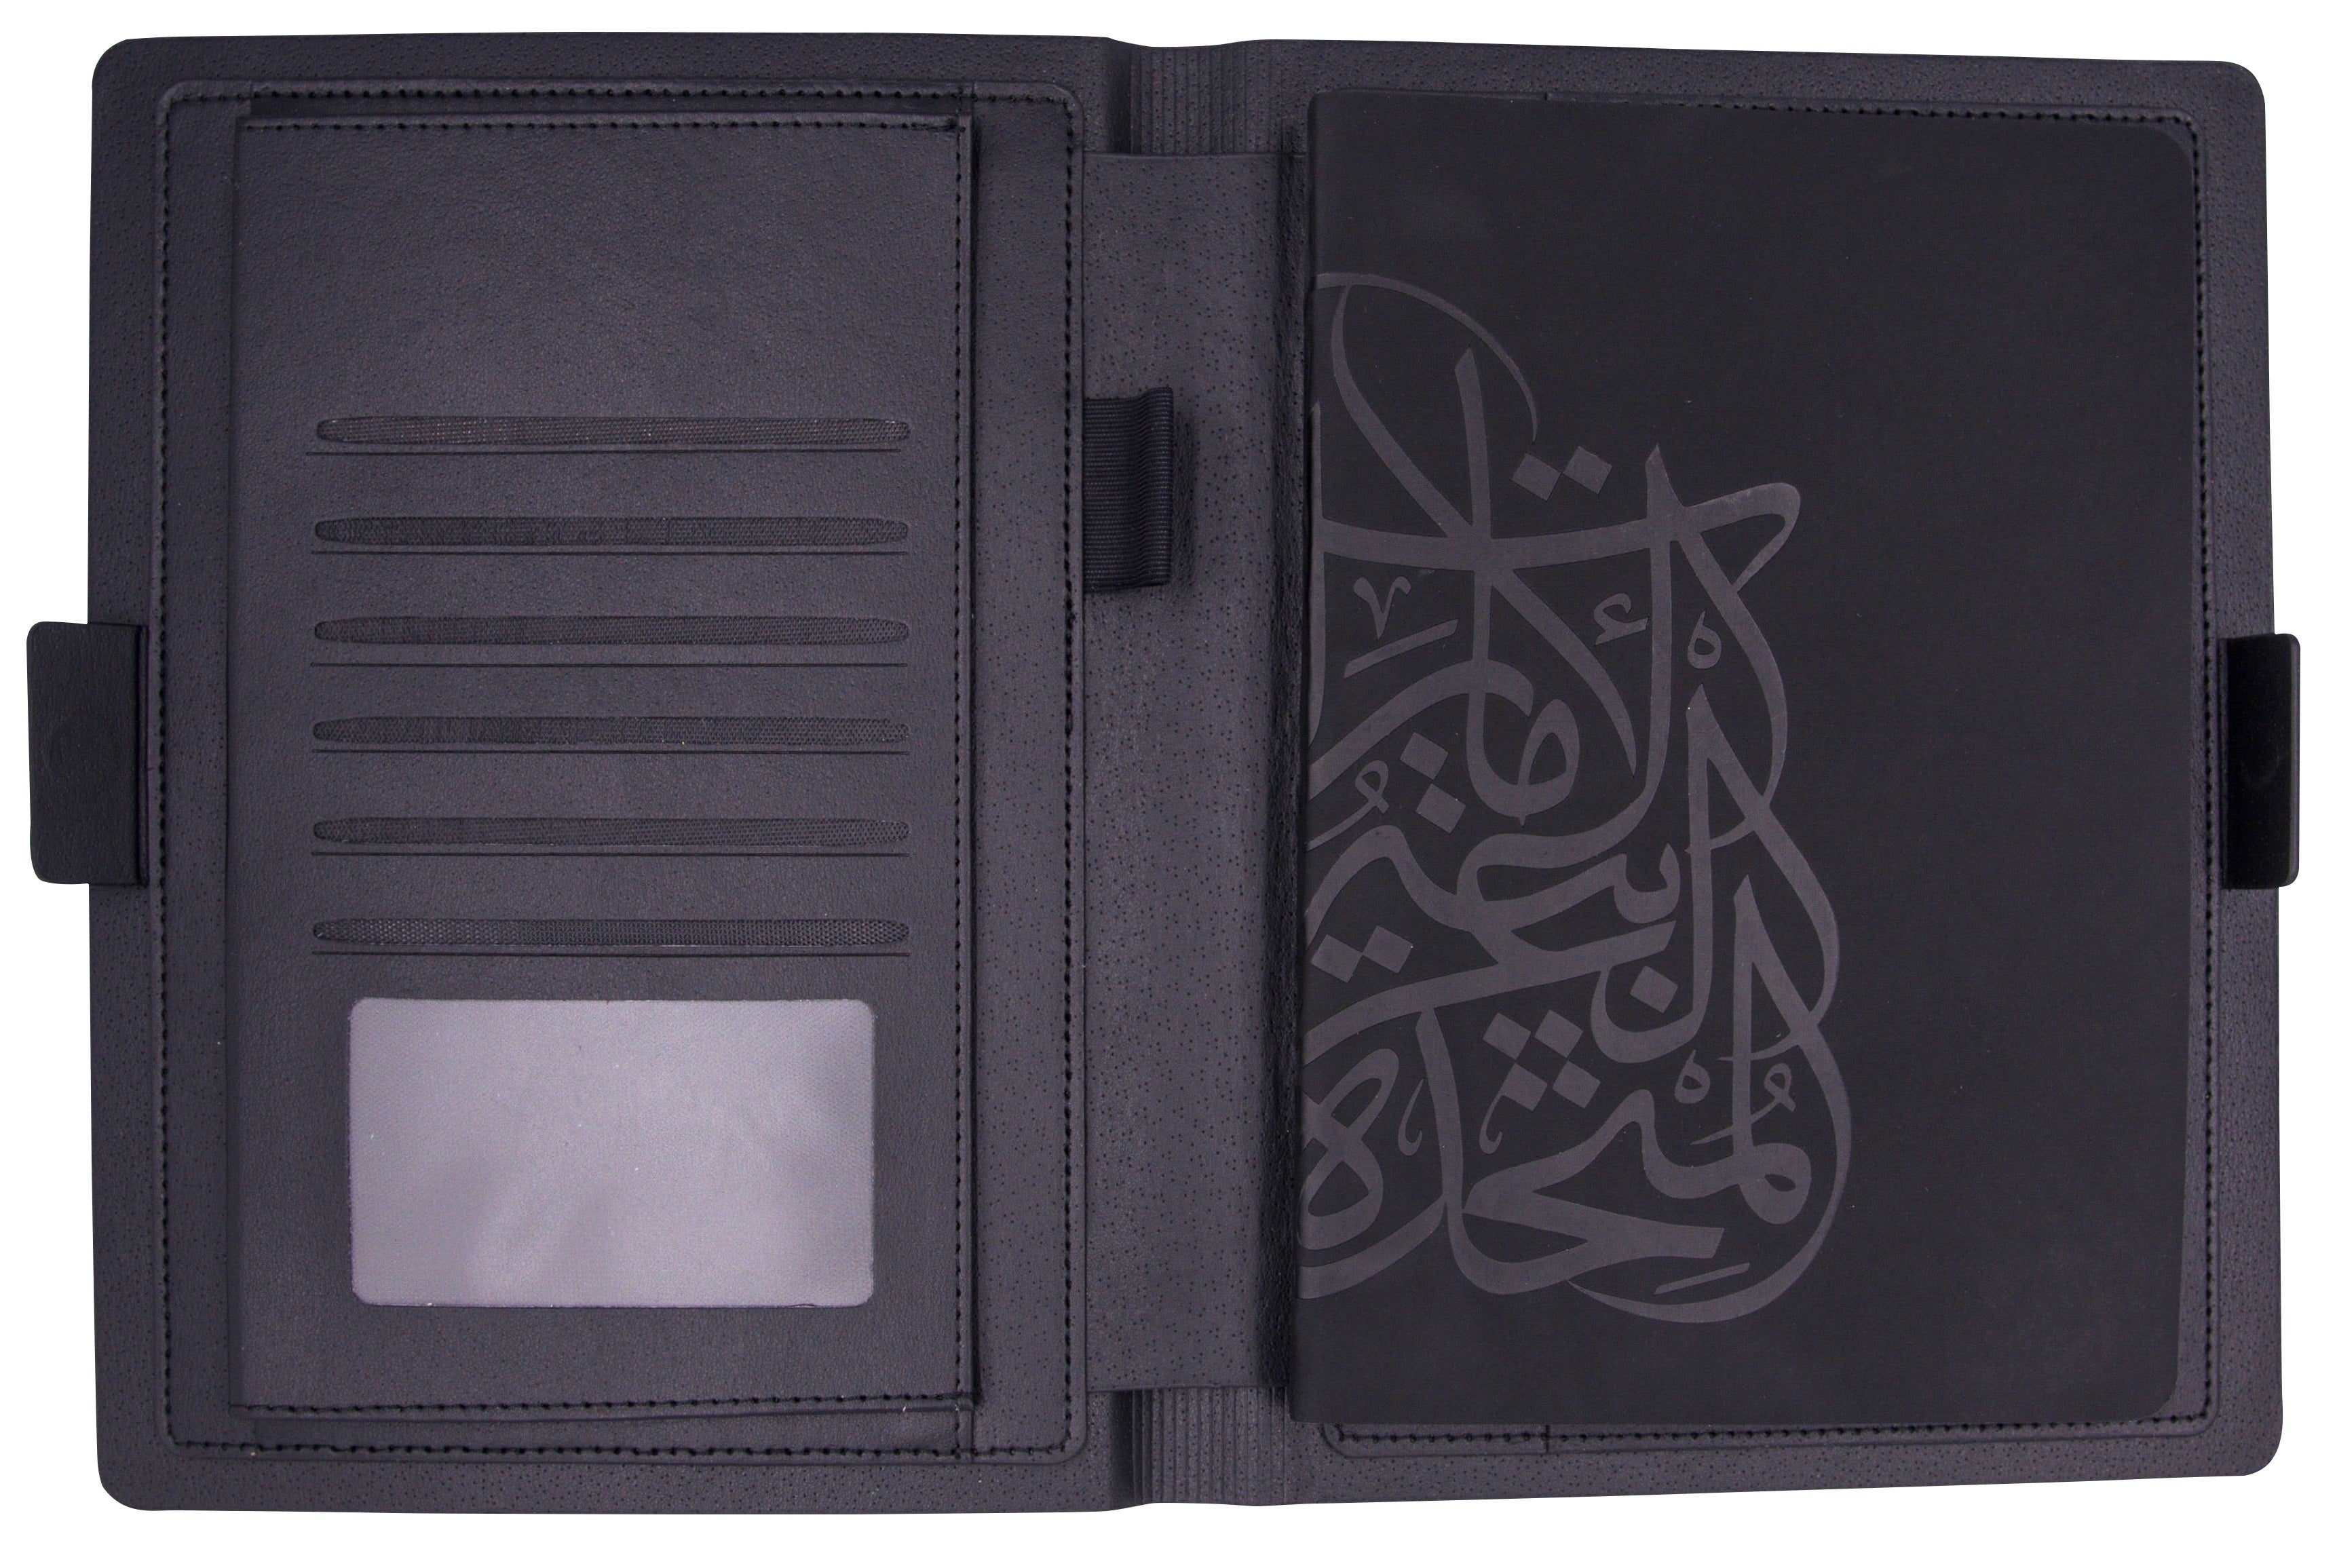 Rovatti UAE Notebook Black | gifts for men & women | uae national day gifts